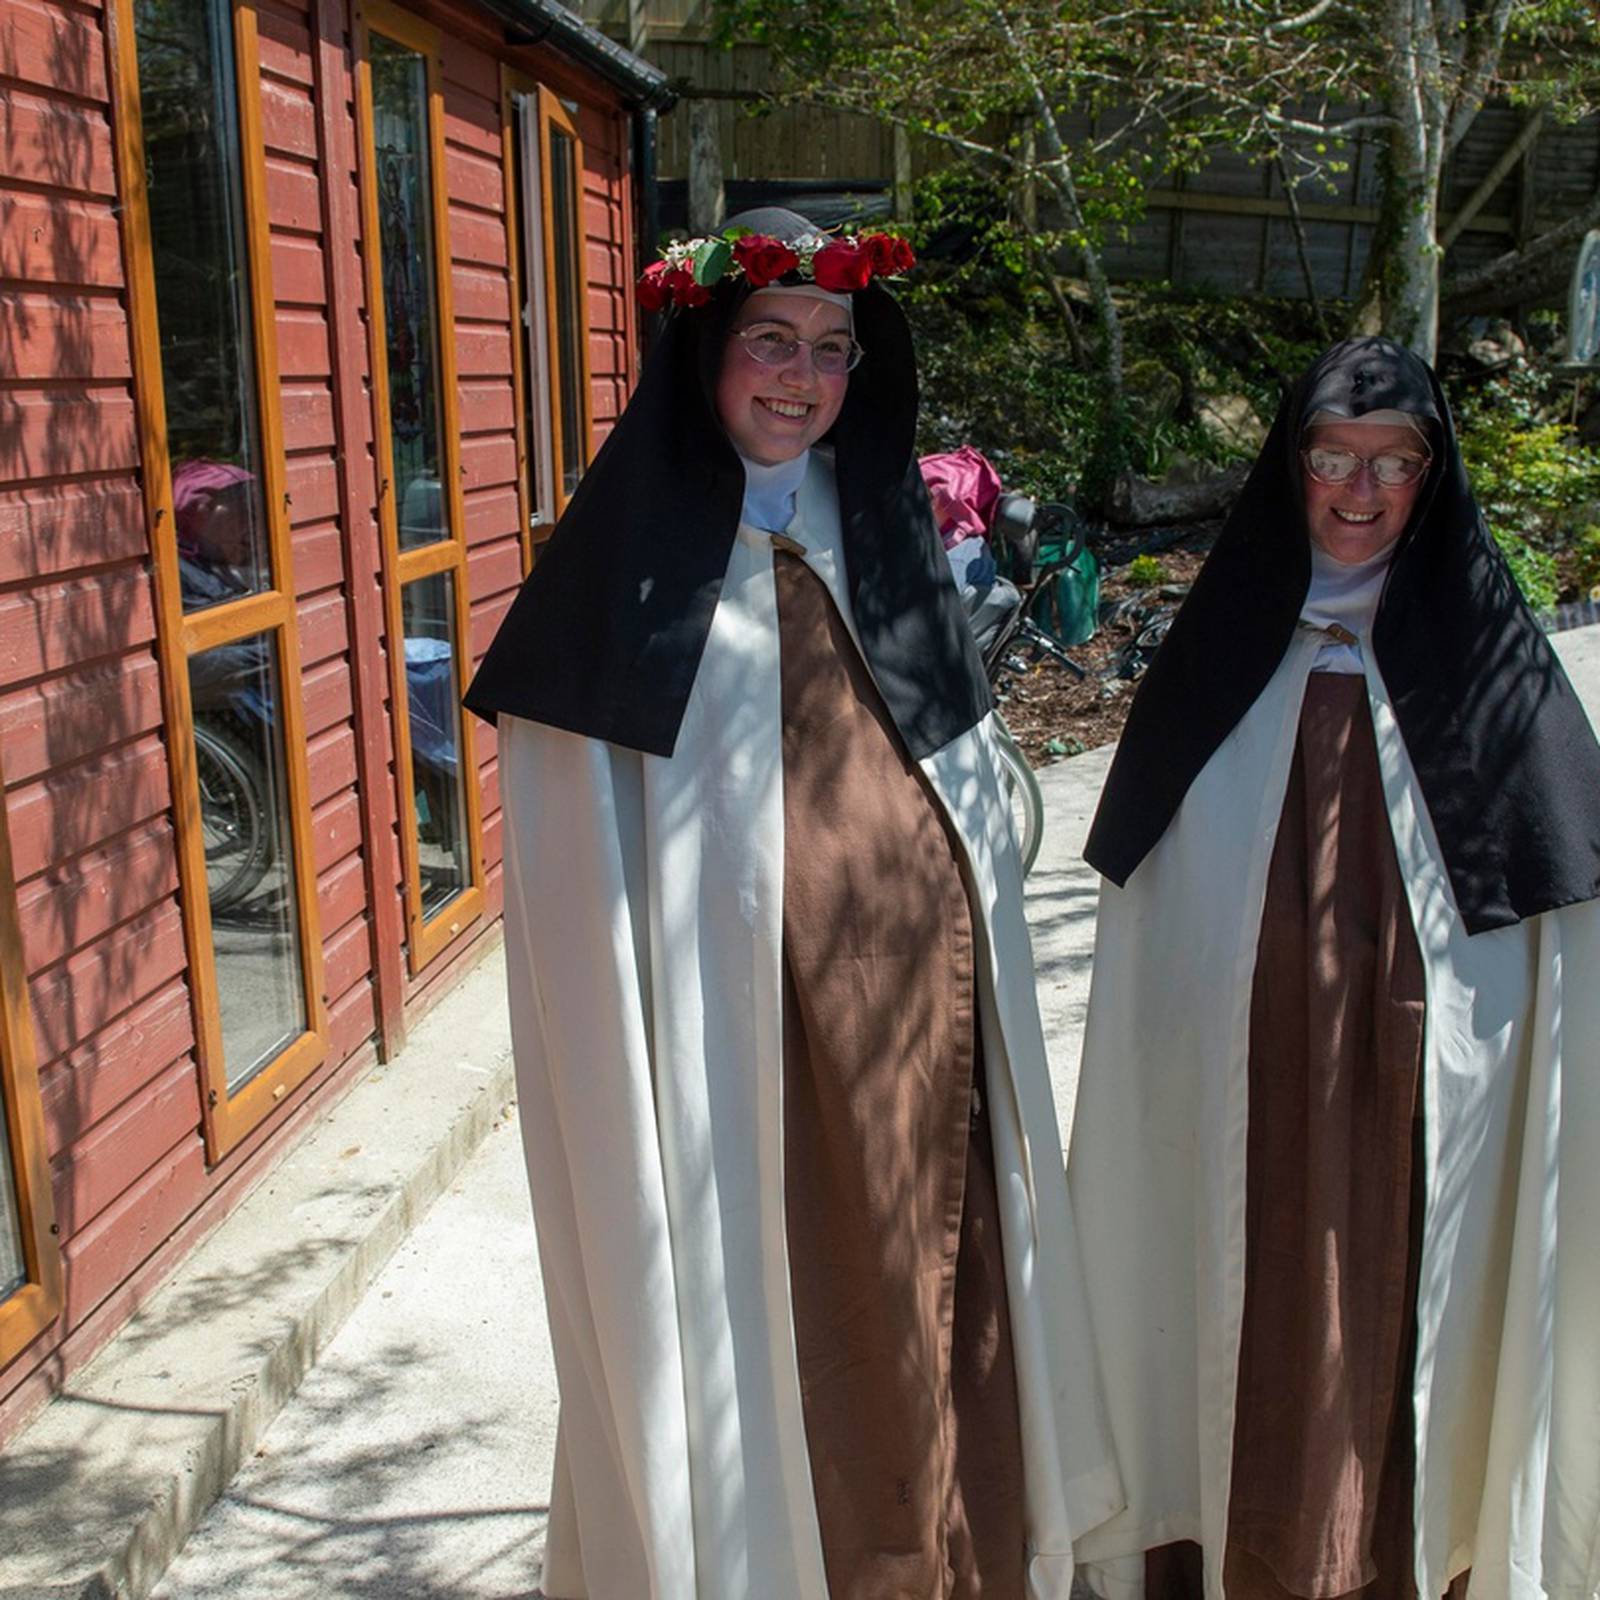 Nuns' designer trunk discovered after decades in a shed – The Irish Times